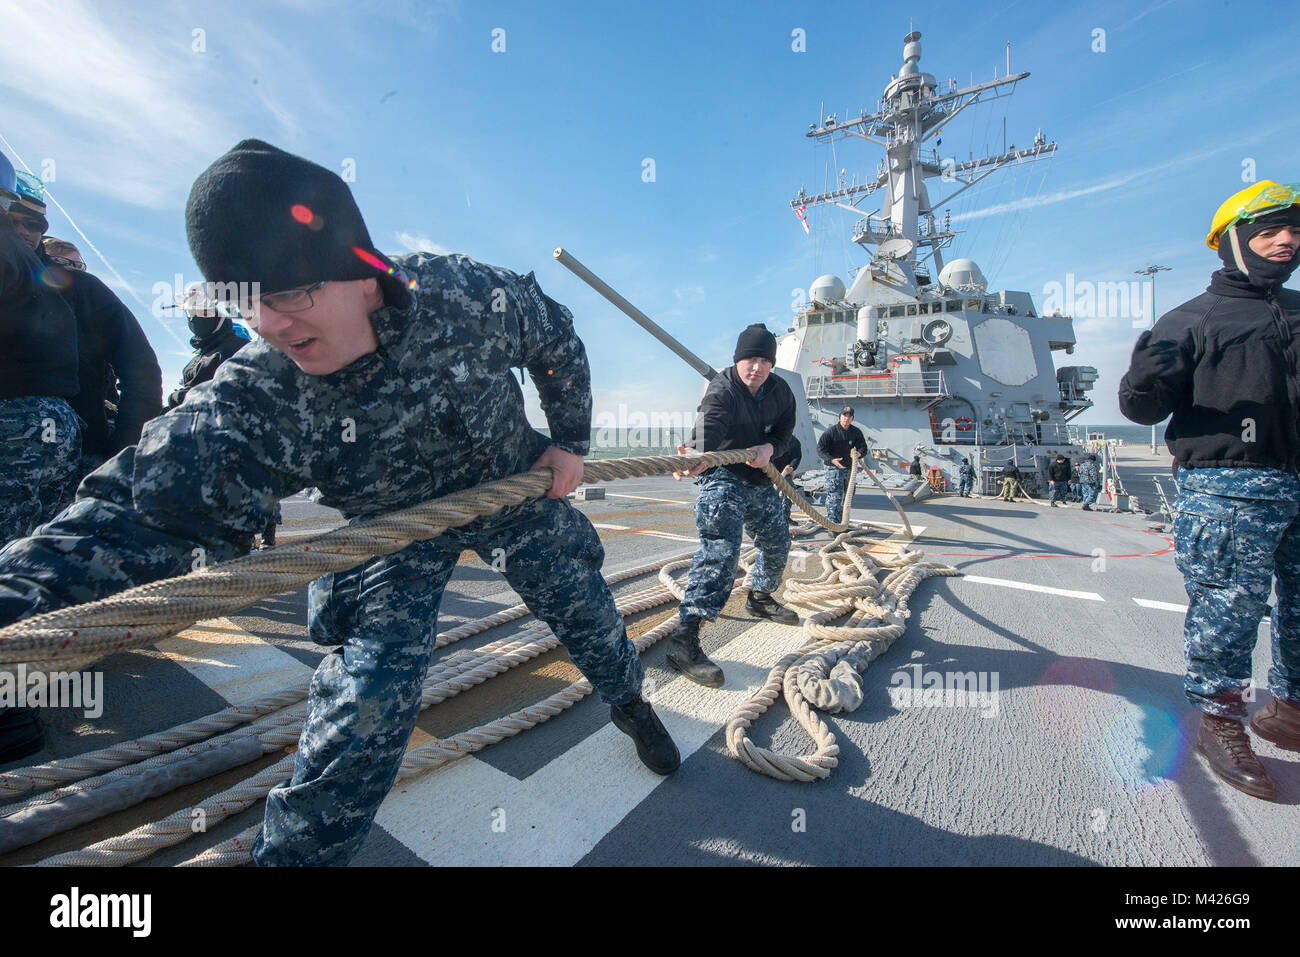 180201-N-ZU710-061  Atlantic Ocean (Feb. 1, 2018) Sailors haul in mooring lines aboard the USS Winston S. Churchill (DDG-81) while pulling out of Naval Station Norfolk to conduct a Composite Training Unit Exercise (COMPTUEX). USS Winston S. Churchill is underway as part of the Harry S. Truman Carrier Strike Group (HSTCSG) COMPTUEX, which evaluates the strike group's ability as a whole to carry out sustained combat operations from the sea, ultimately certifying the HSTCSG for deployment. (U.S. Navy Photo by Mass Communication Specialist 3rd Class Michael Chen/Released) Stock Photo